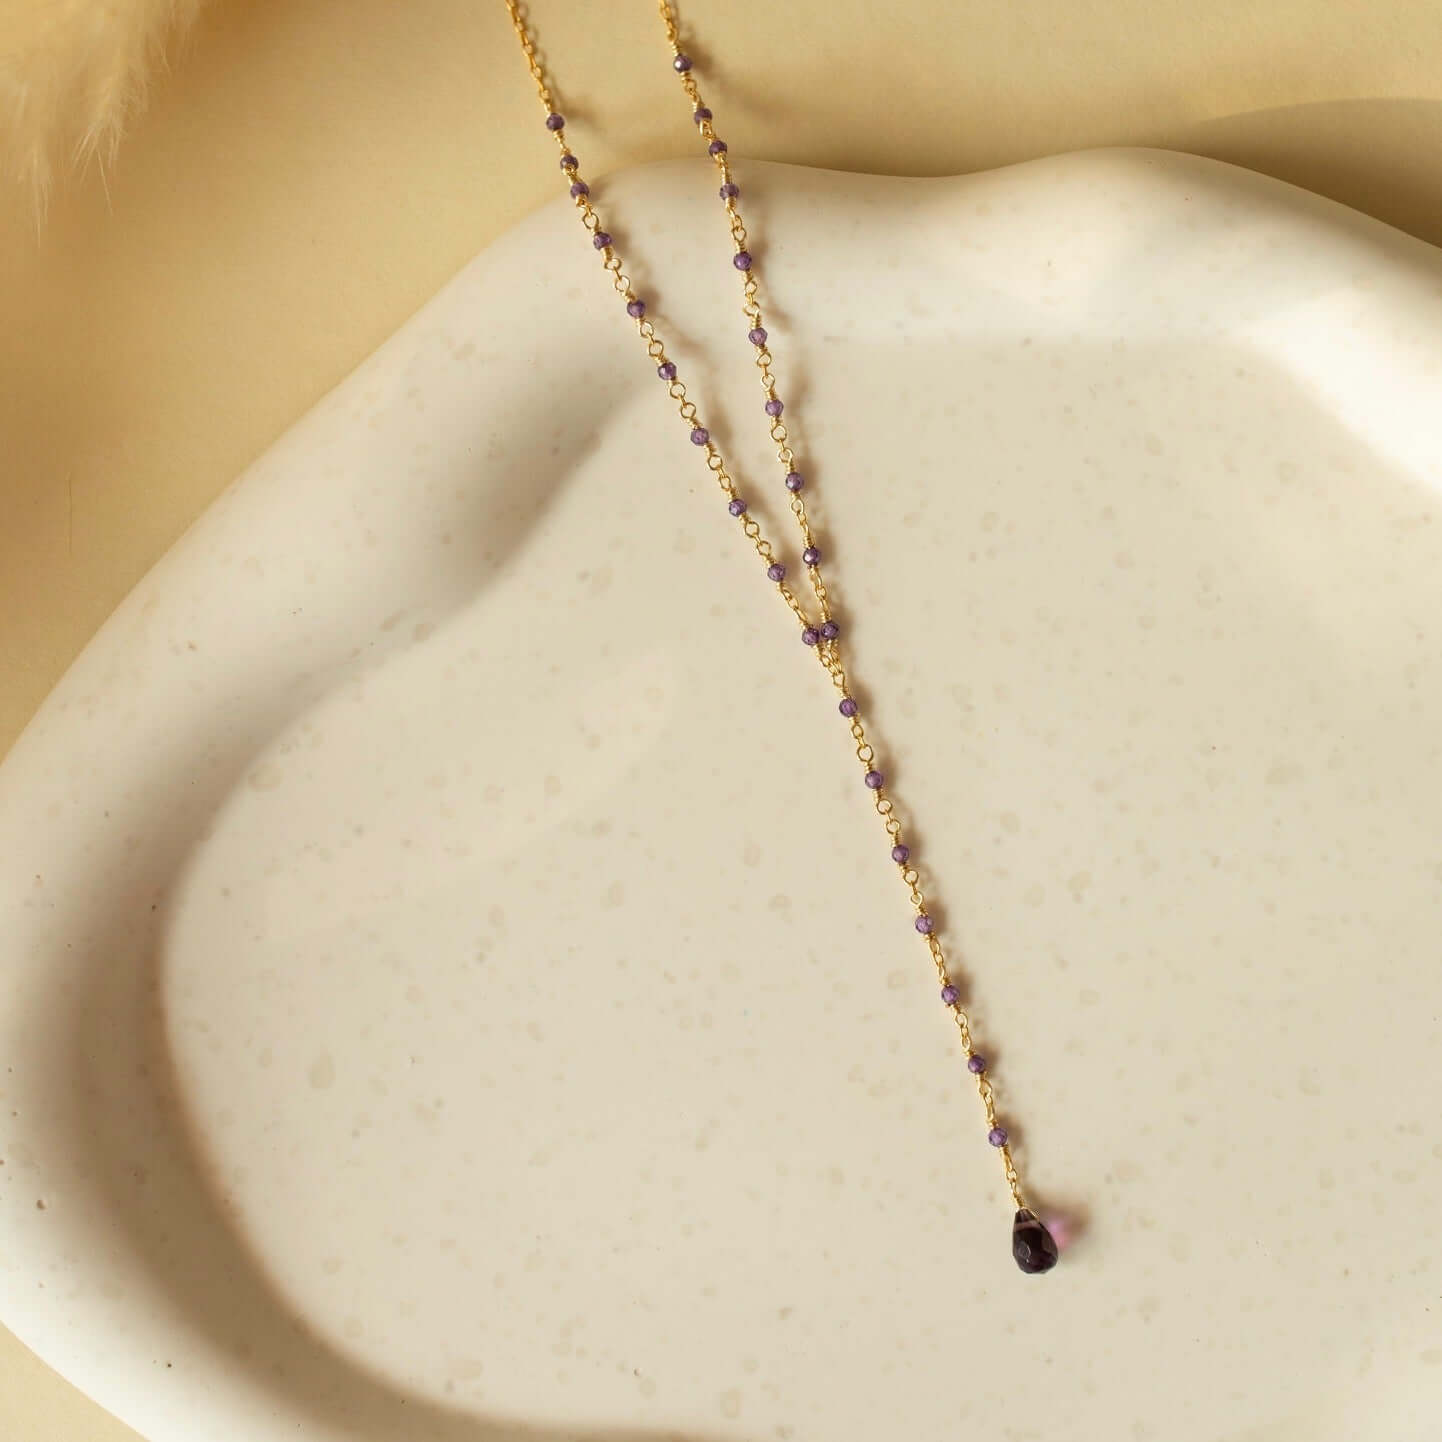 Amethyst gemstone delicately placed on a rustic clay plate. 